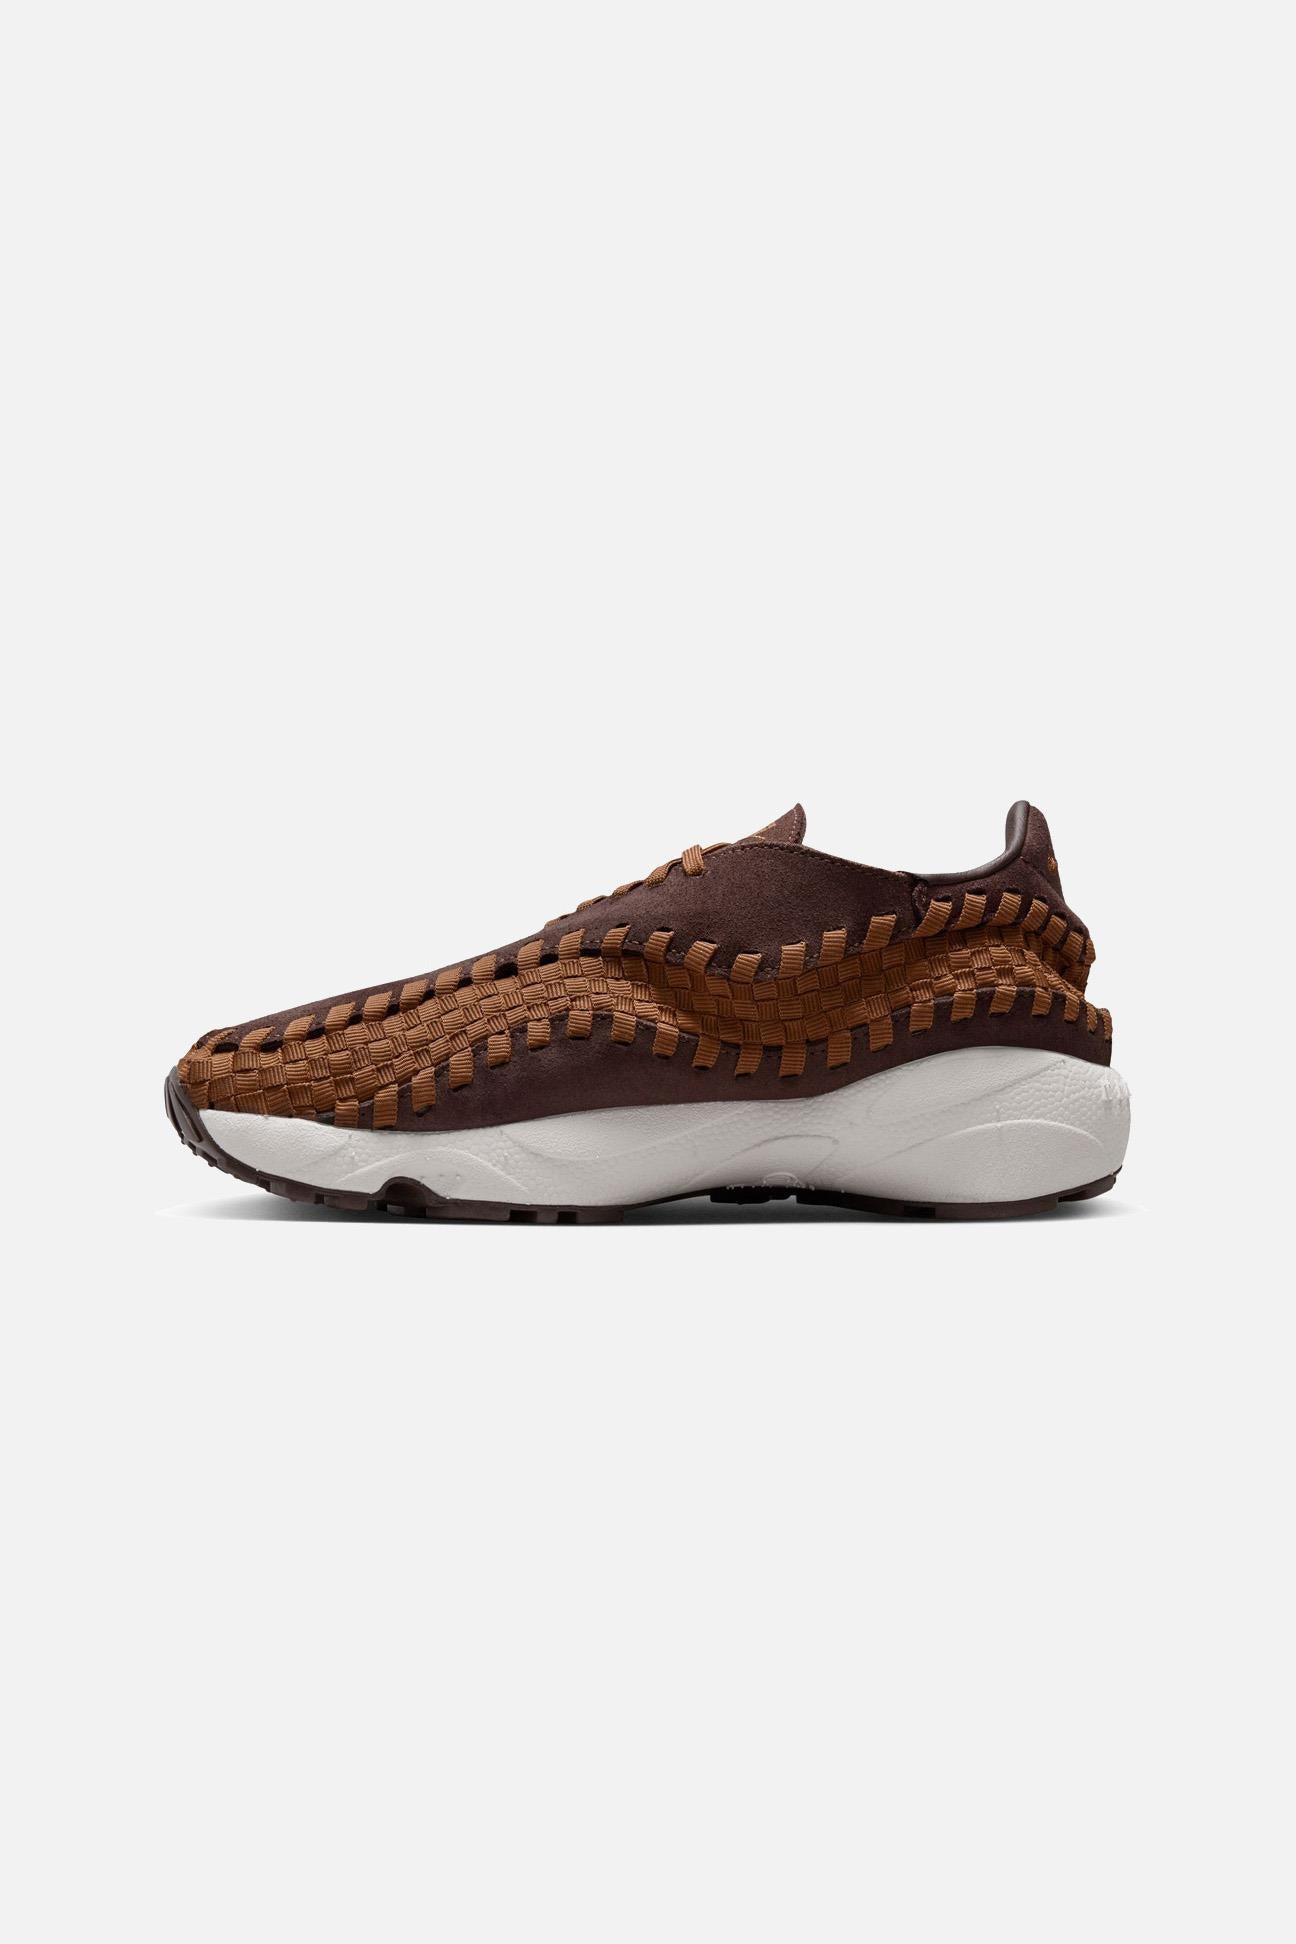  Air Footscape Woven